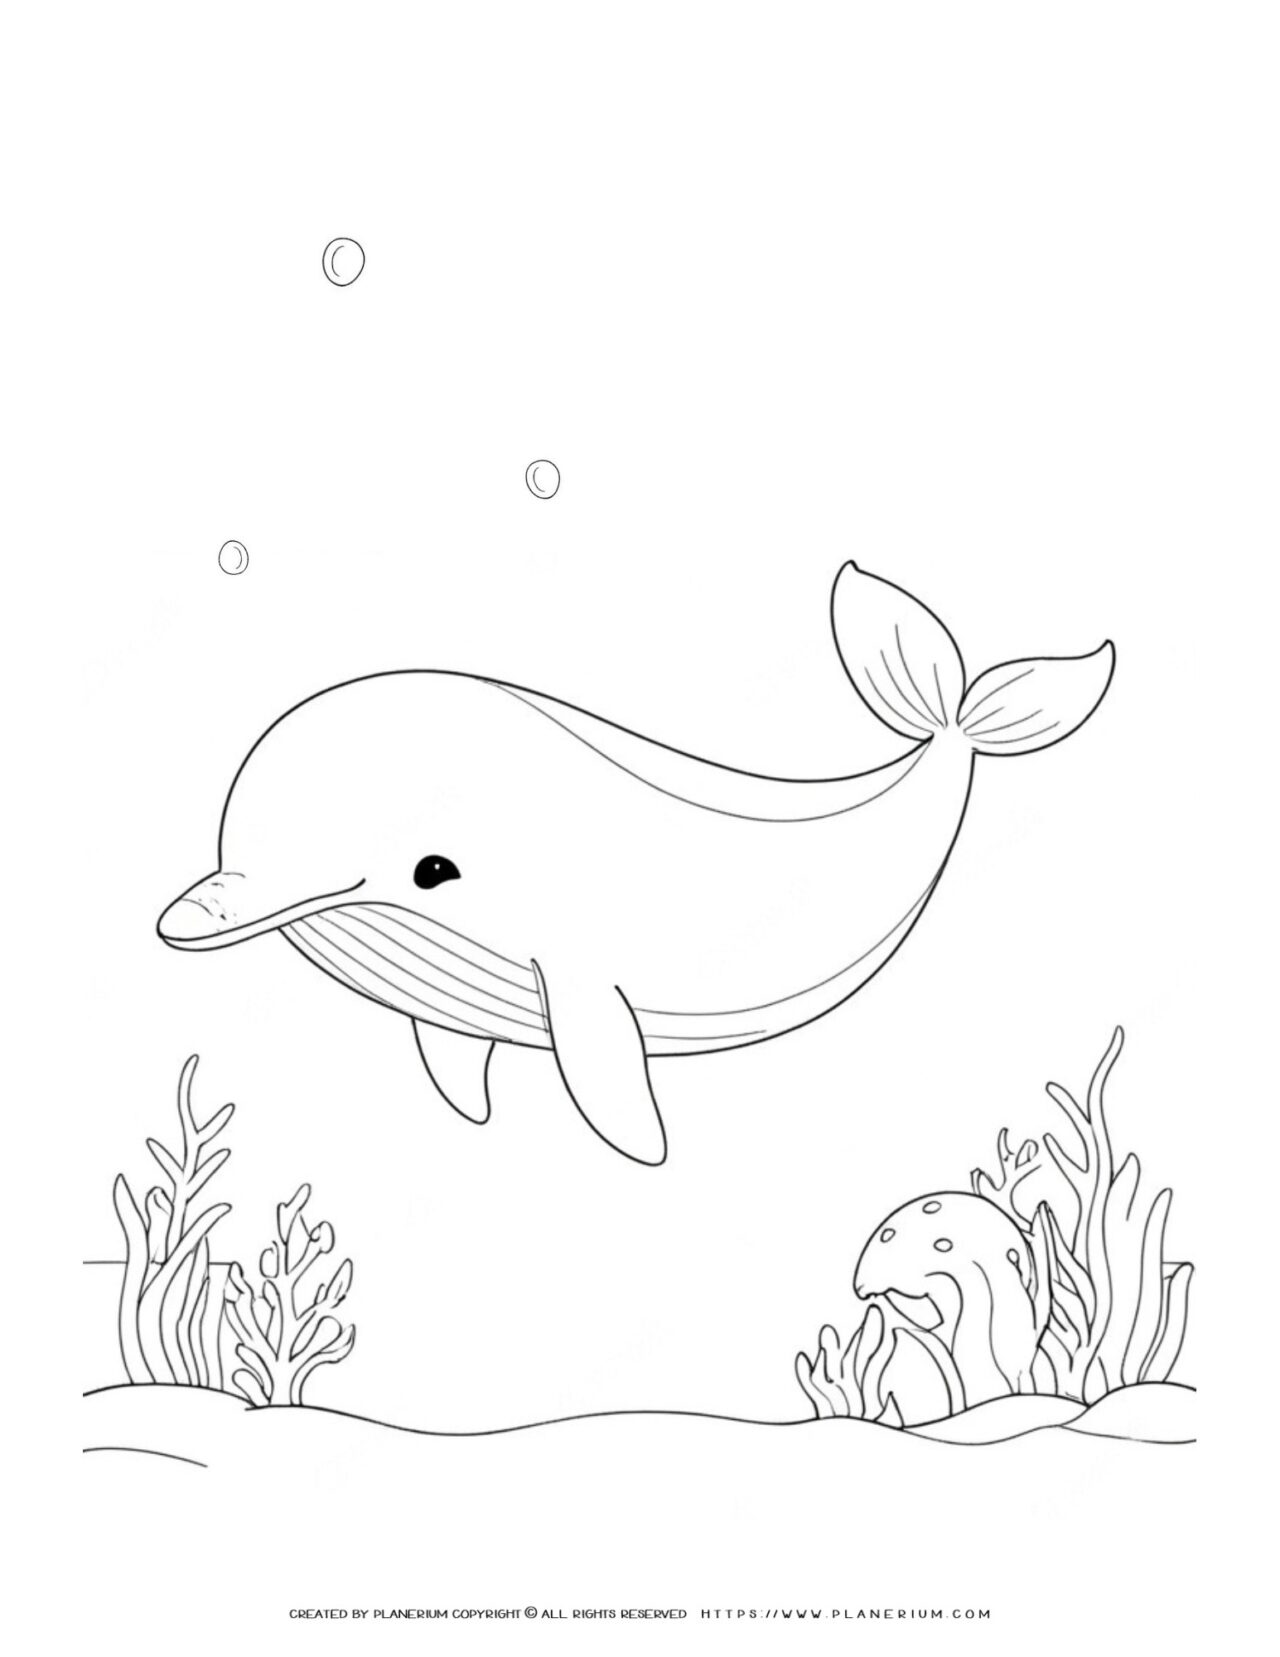 Dolphin-coloring-page-for-children